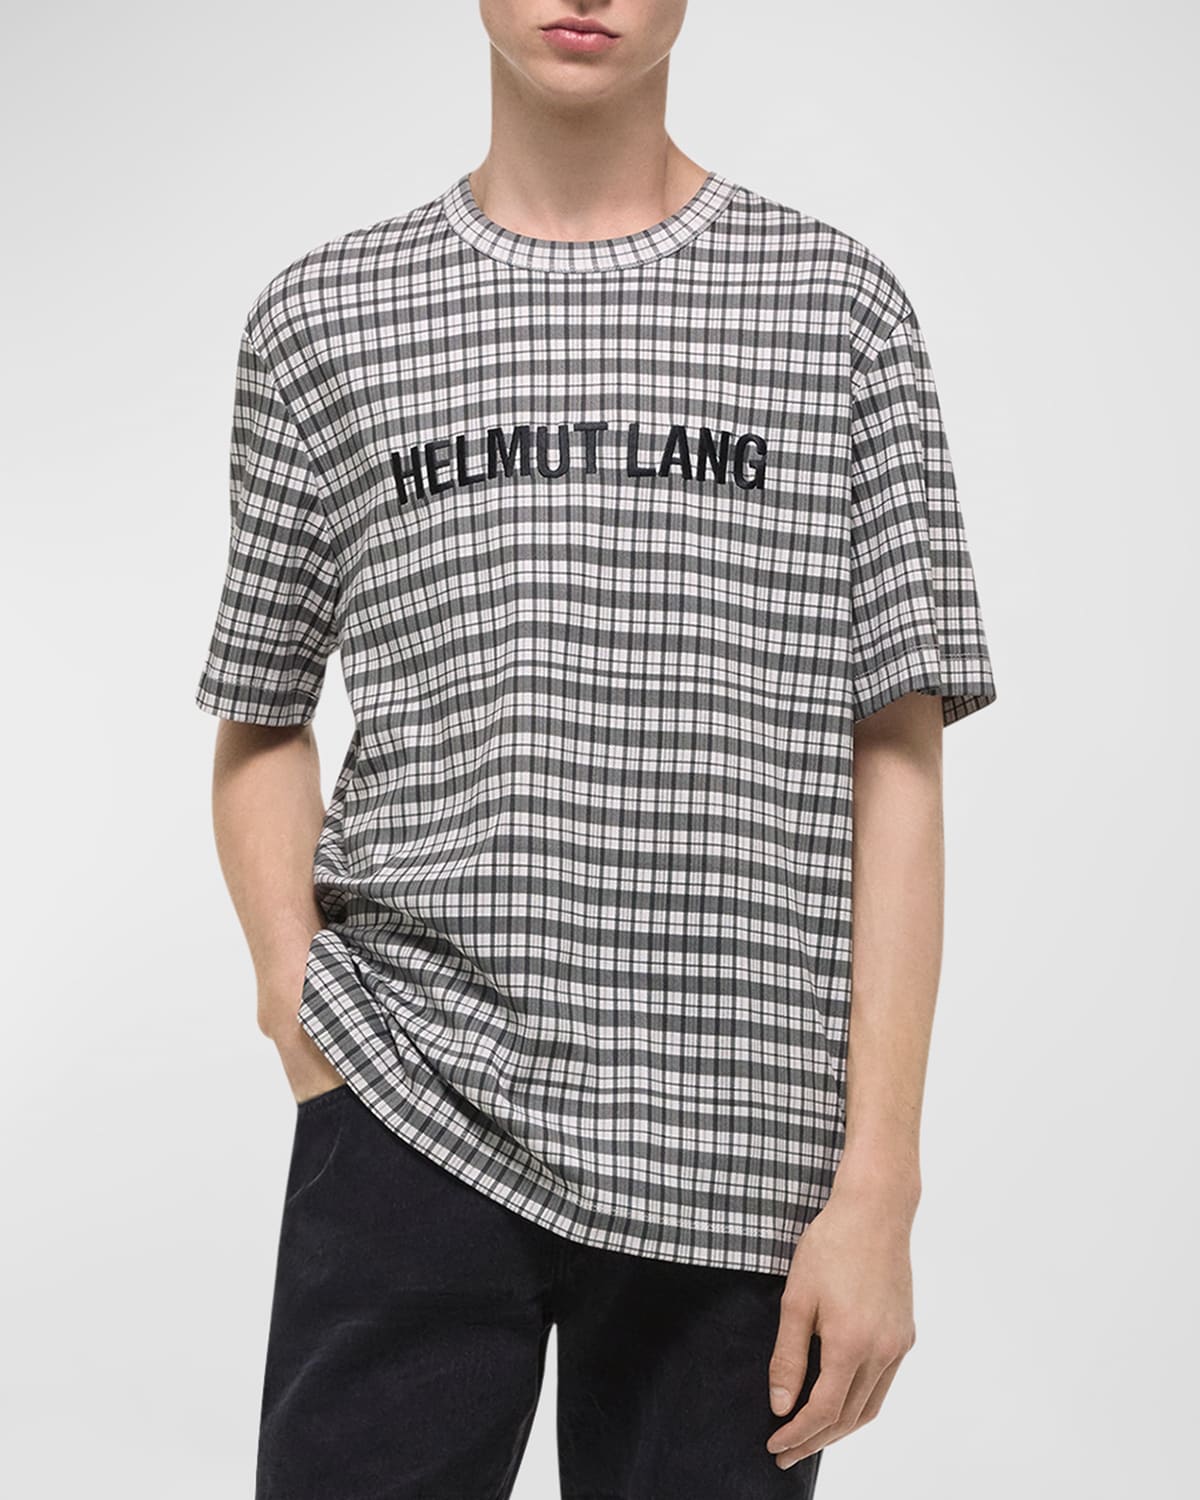 Men's Check T-Shirt with Embroidered Logo